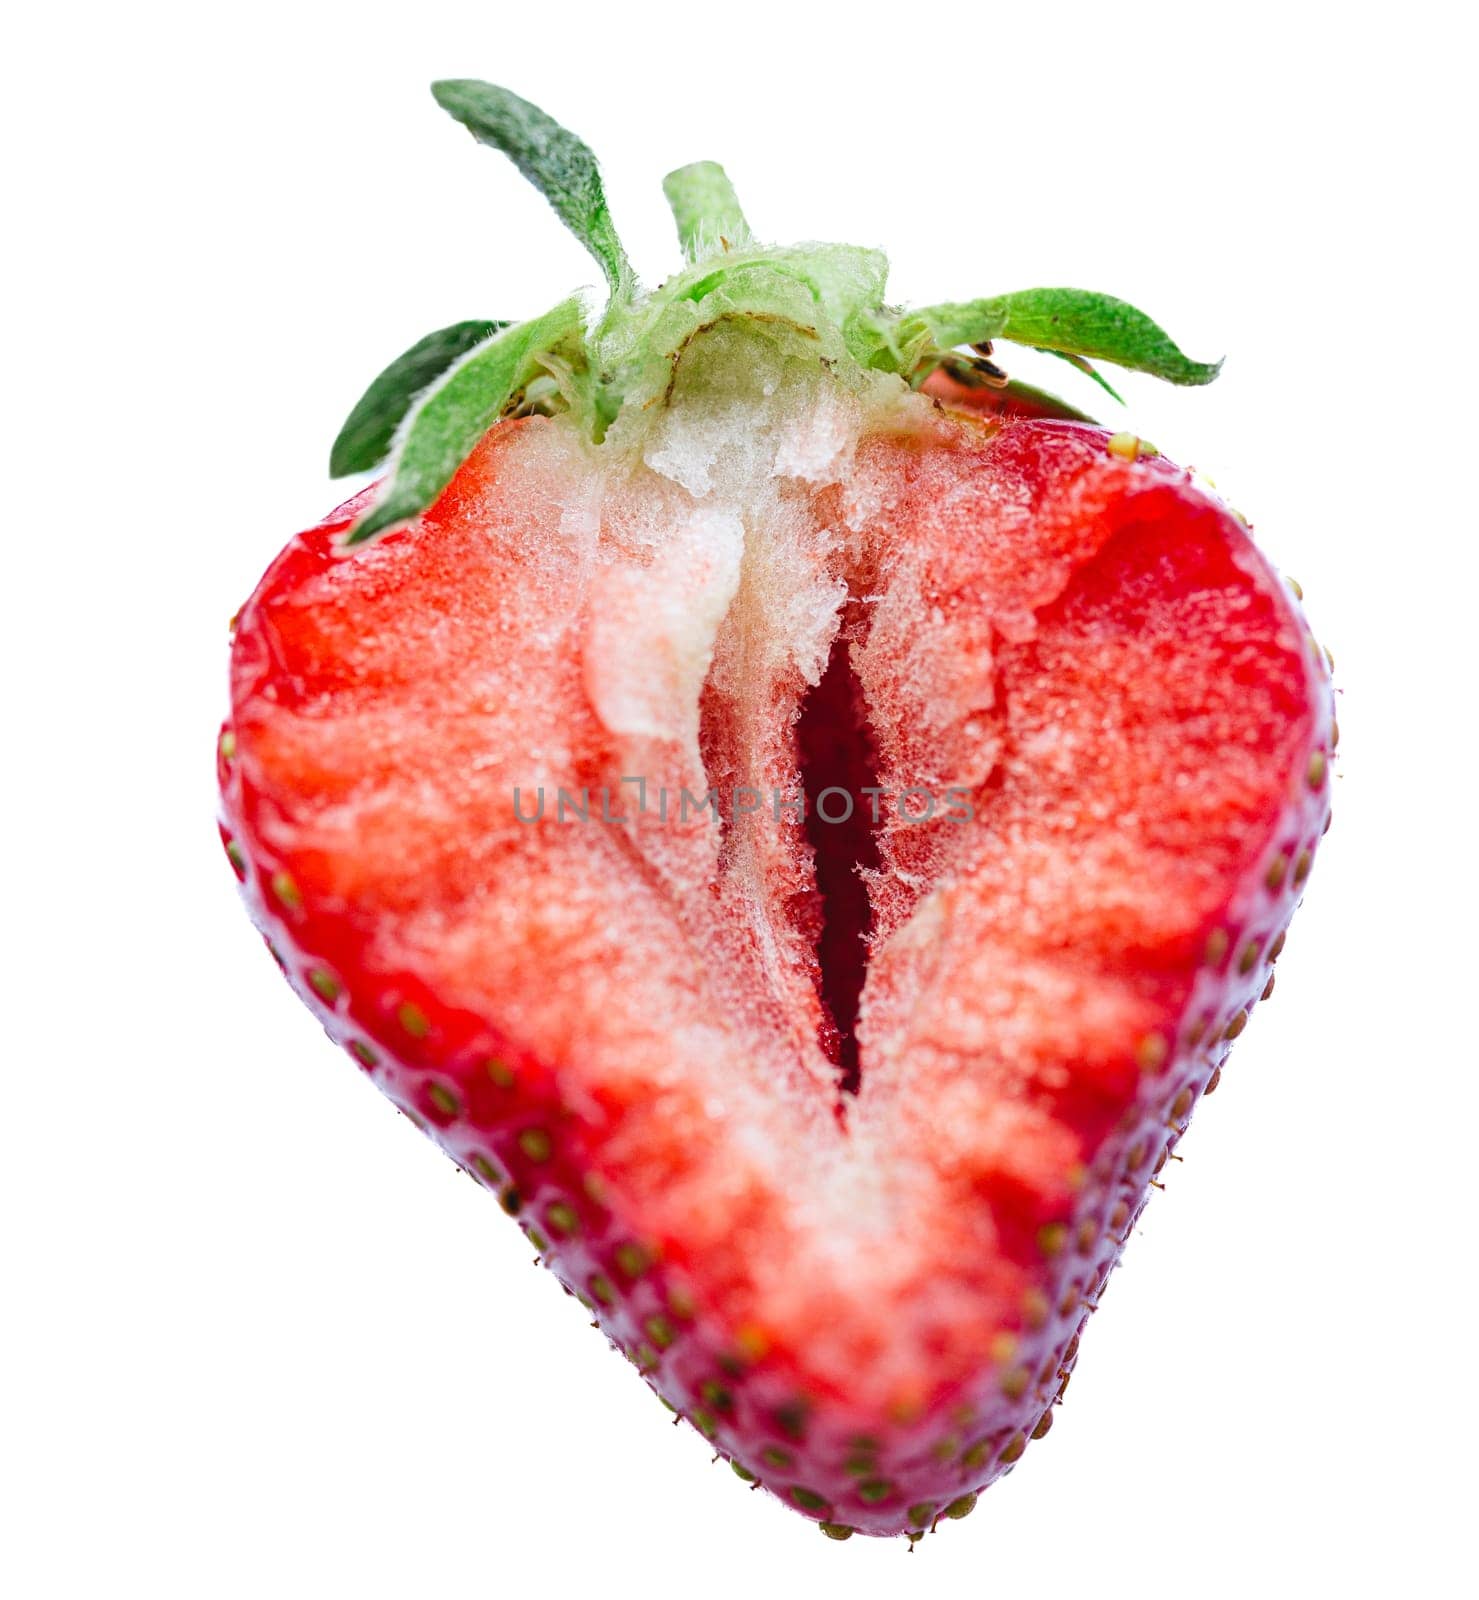 Ripe half of a strawberry on a white background. Shallow dof